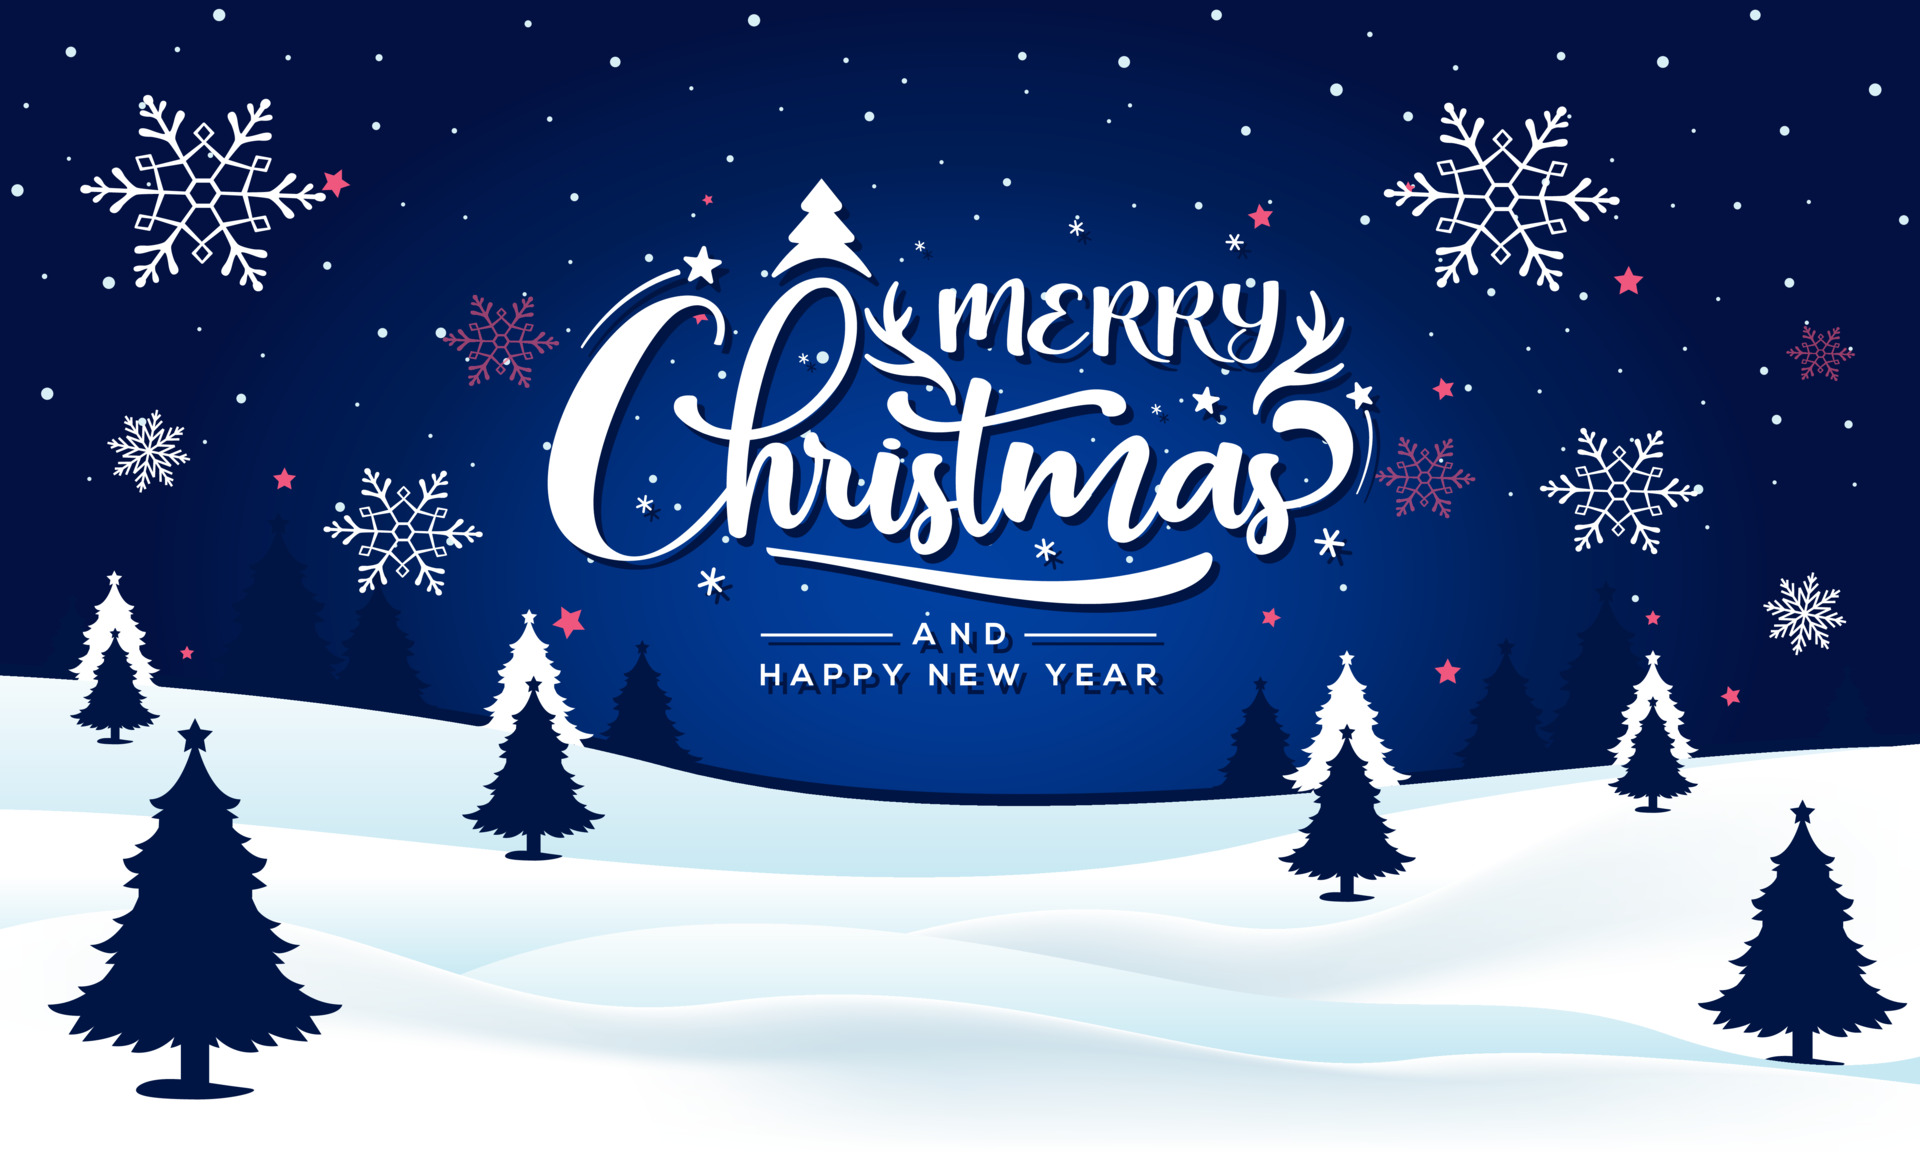 merry-christmas-and-new-year-typography-on-shiny-xmas-background-with-winter-landscape-with-sn...jpg